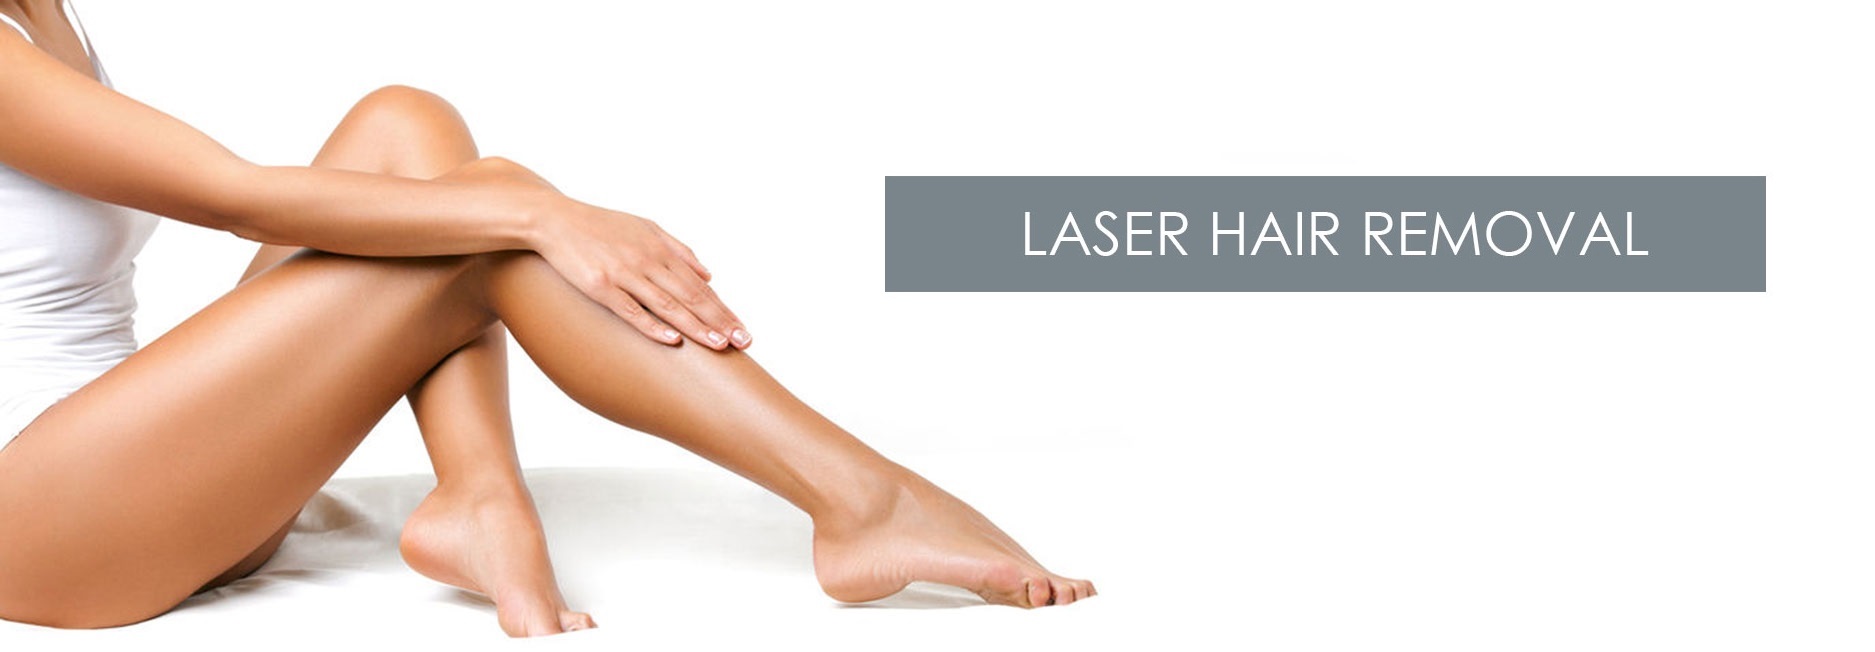 laser hair removal - Permanent Hair Removal